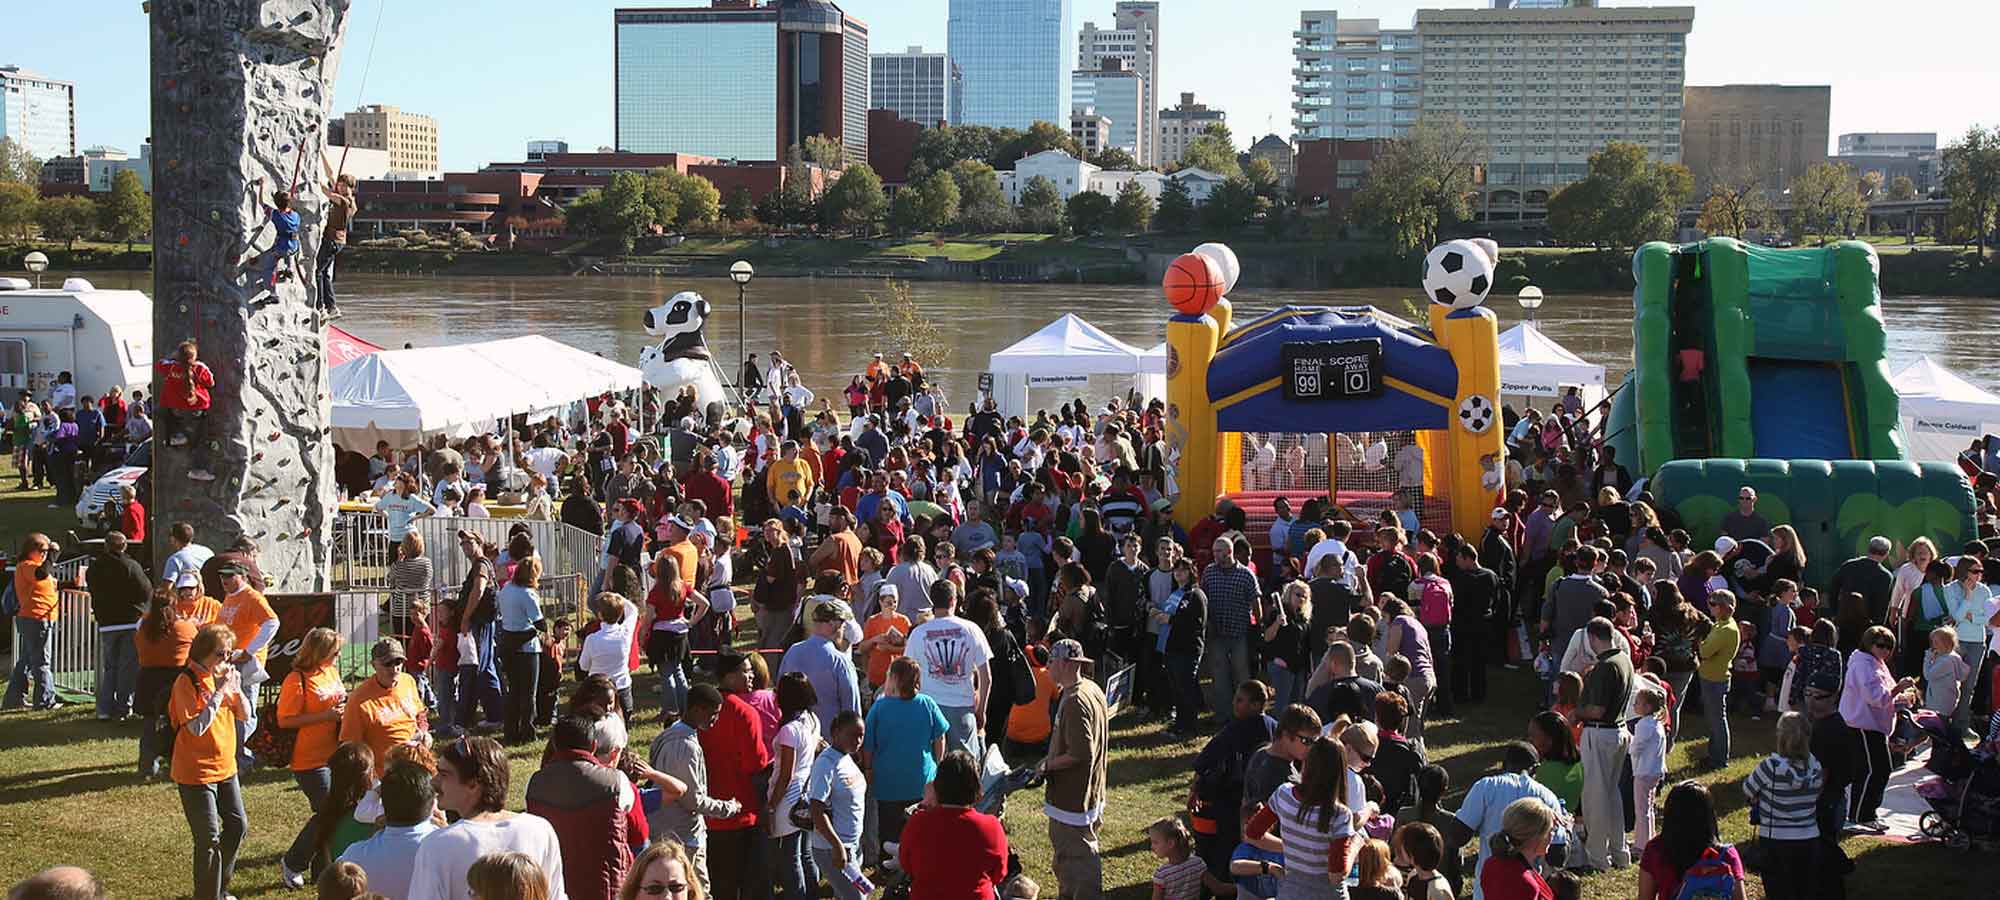 citywide event by river, with downtown Little Rock in background